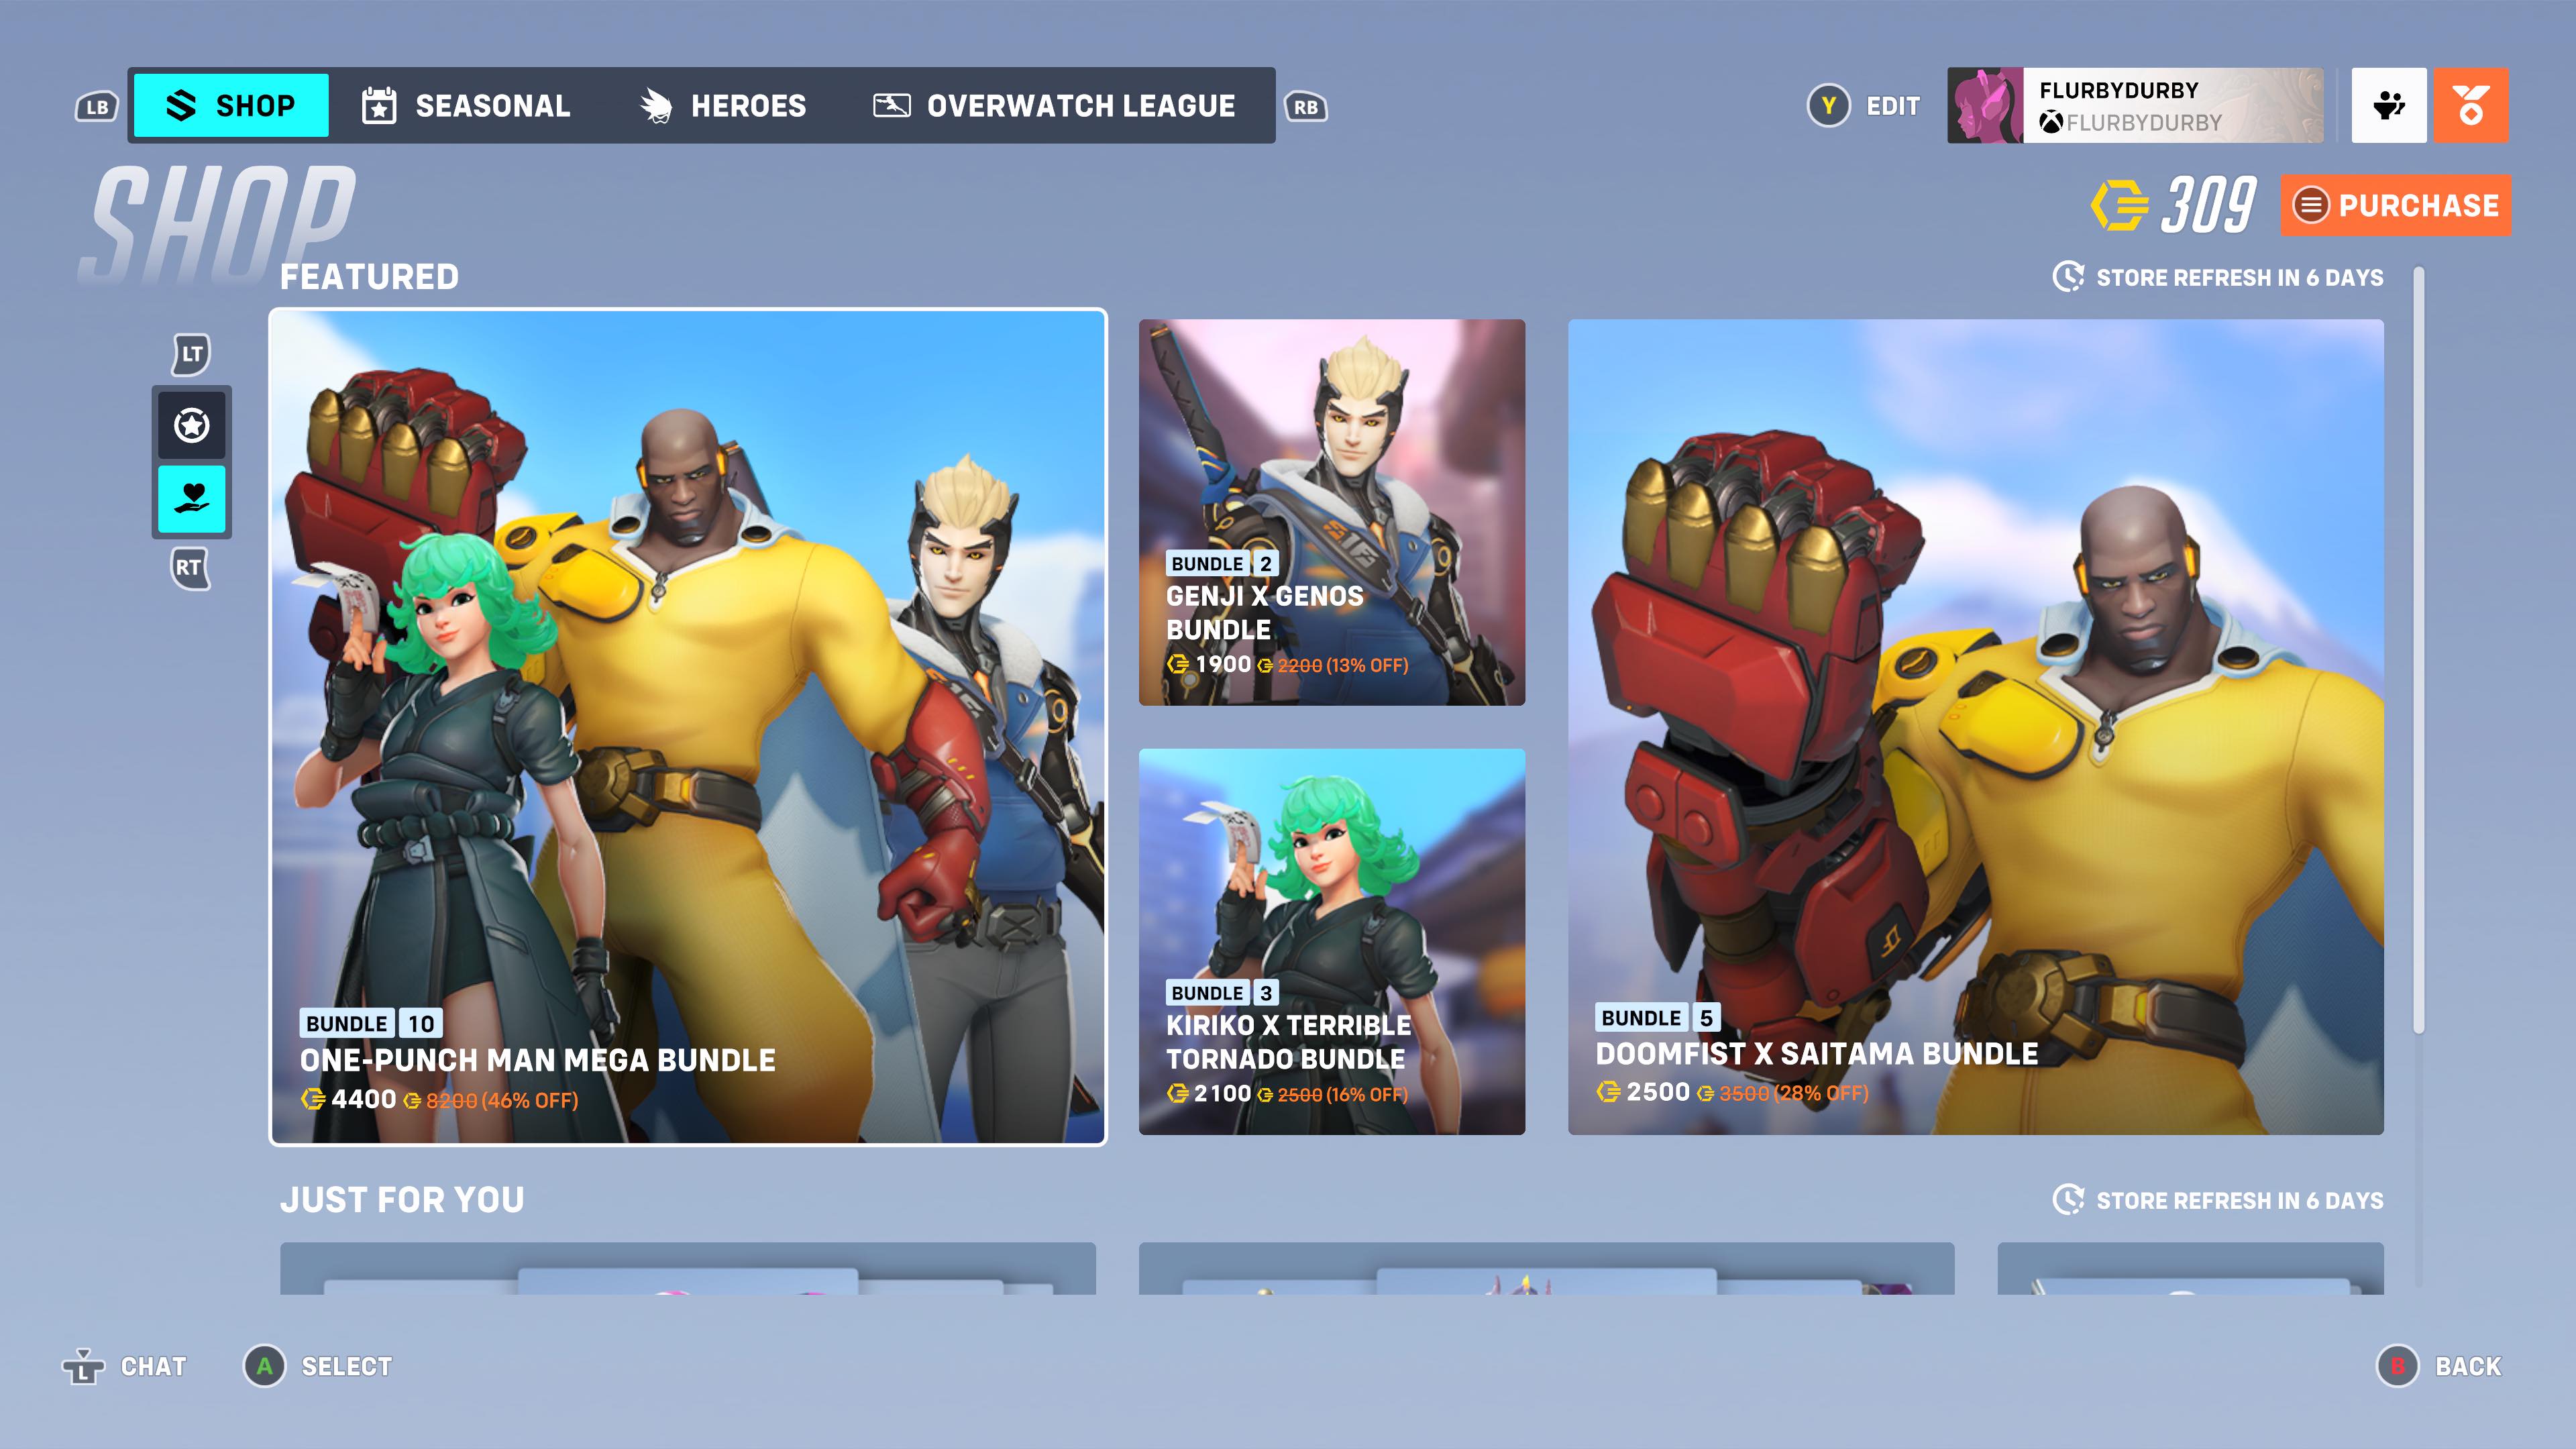 X 上的 Naeri X 나에리：「Overwatch 2 Season 3 Which New Skin would you most like  to buy? Many new skins, events and anime crossover skins were revealed in  Season 3. What's your